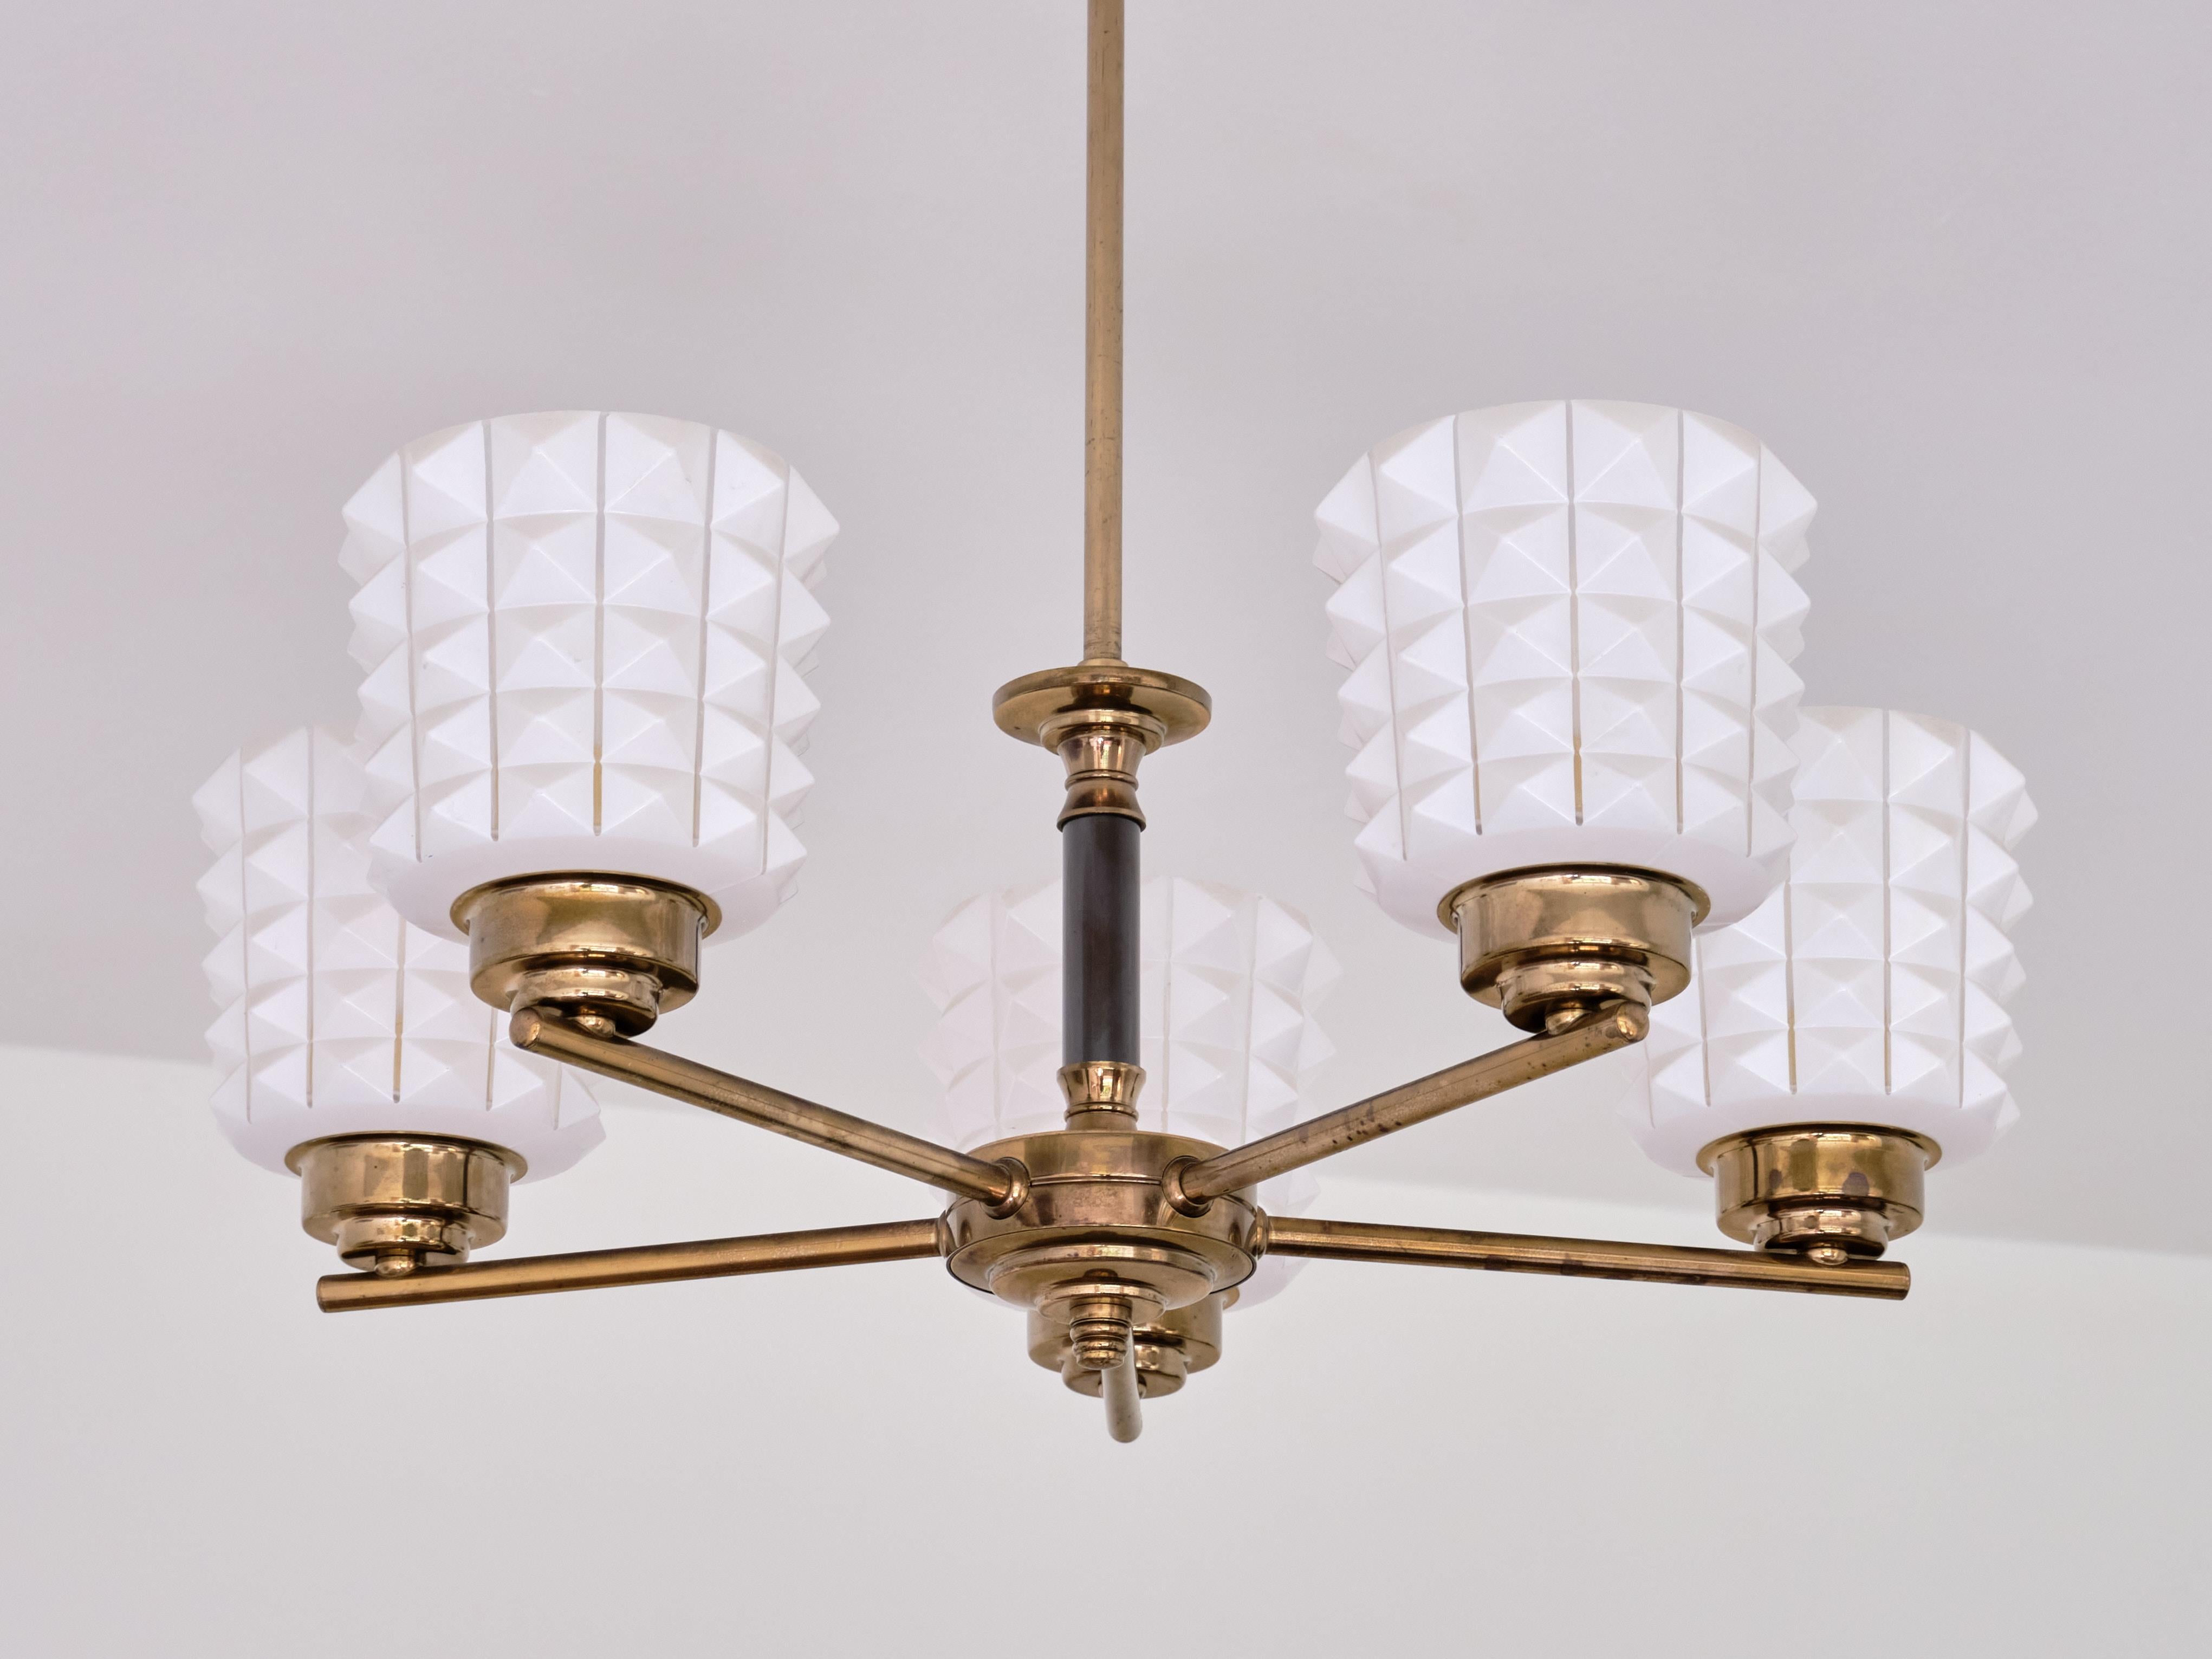 This striking chandelier was produced Sweden in the late 1950s. The fixture consists of a ceiling cup and central brass stem with the five brass arms attached to the lower centre. The distinct shades are made of a matte white opaline glass. The